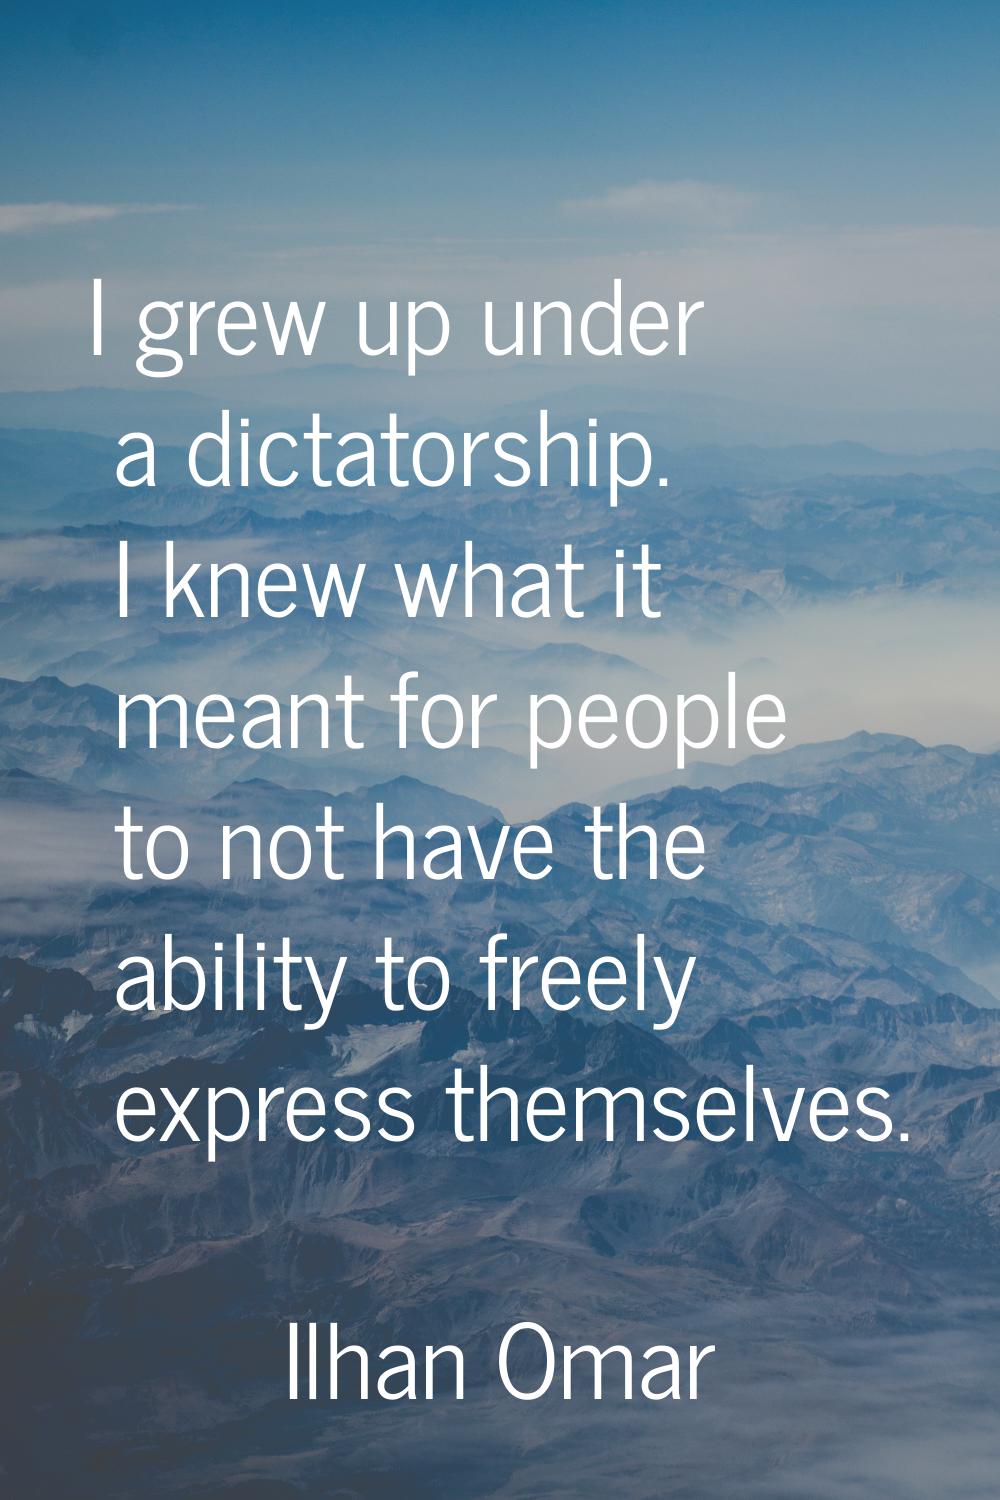 I grew up under a dictatorship. I knew what it meant for people to not have the ability to freely e